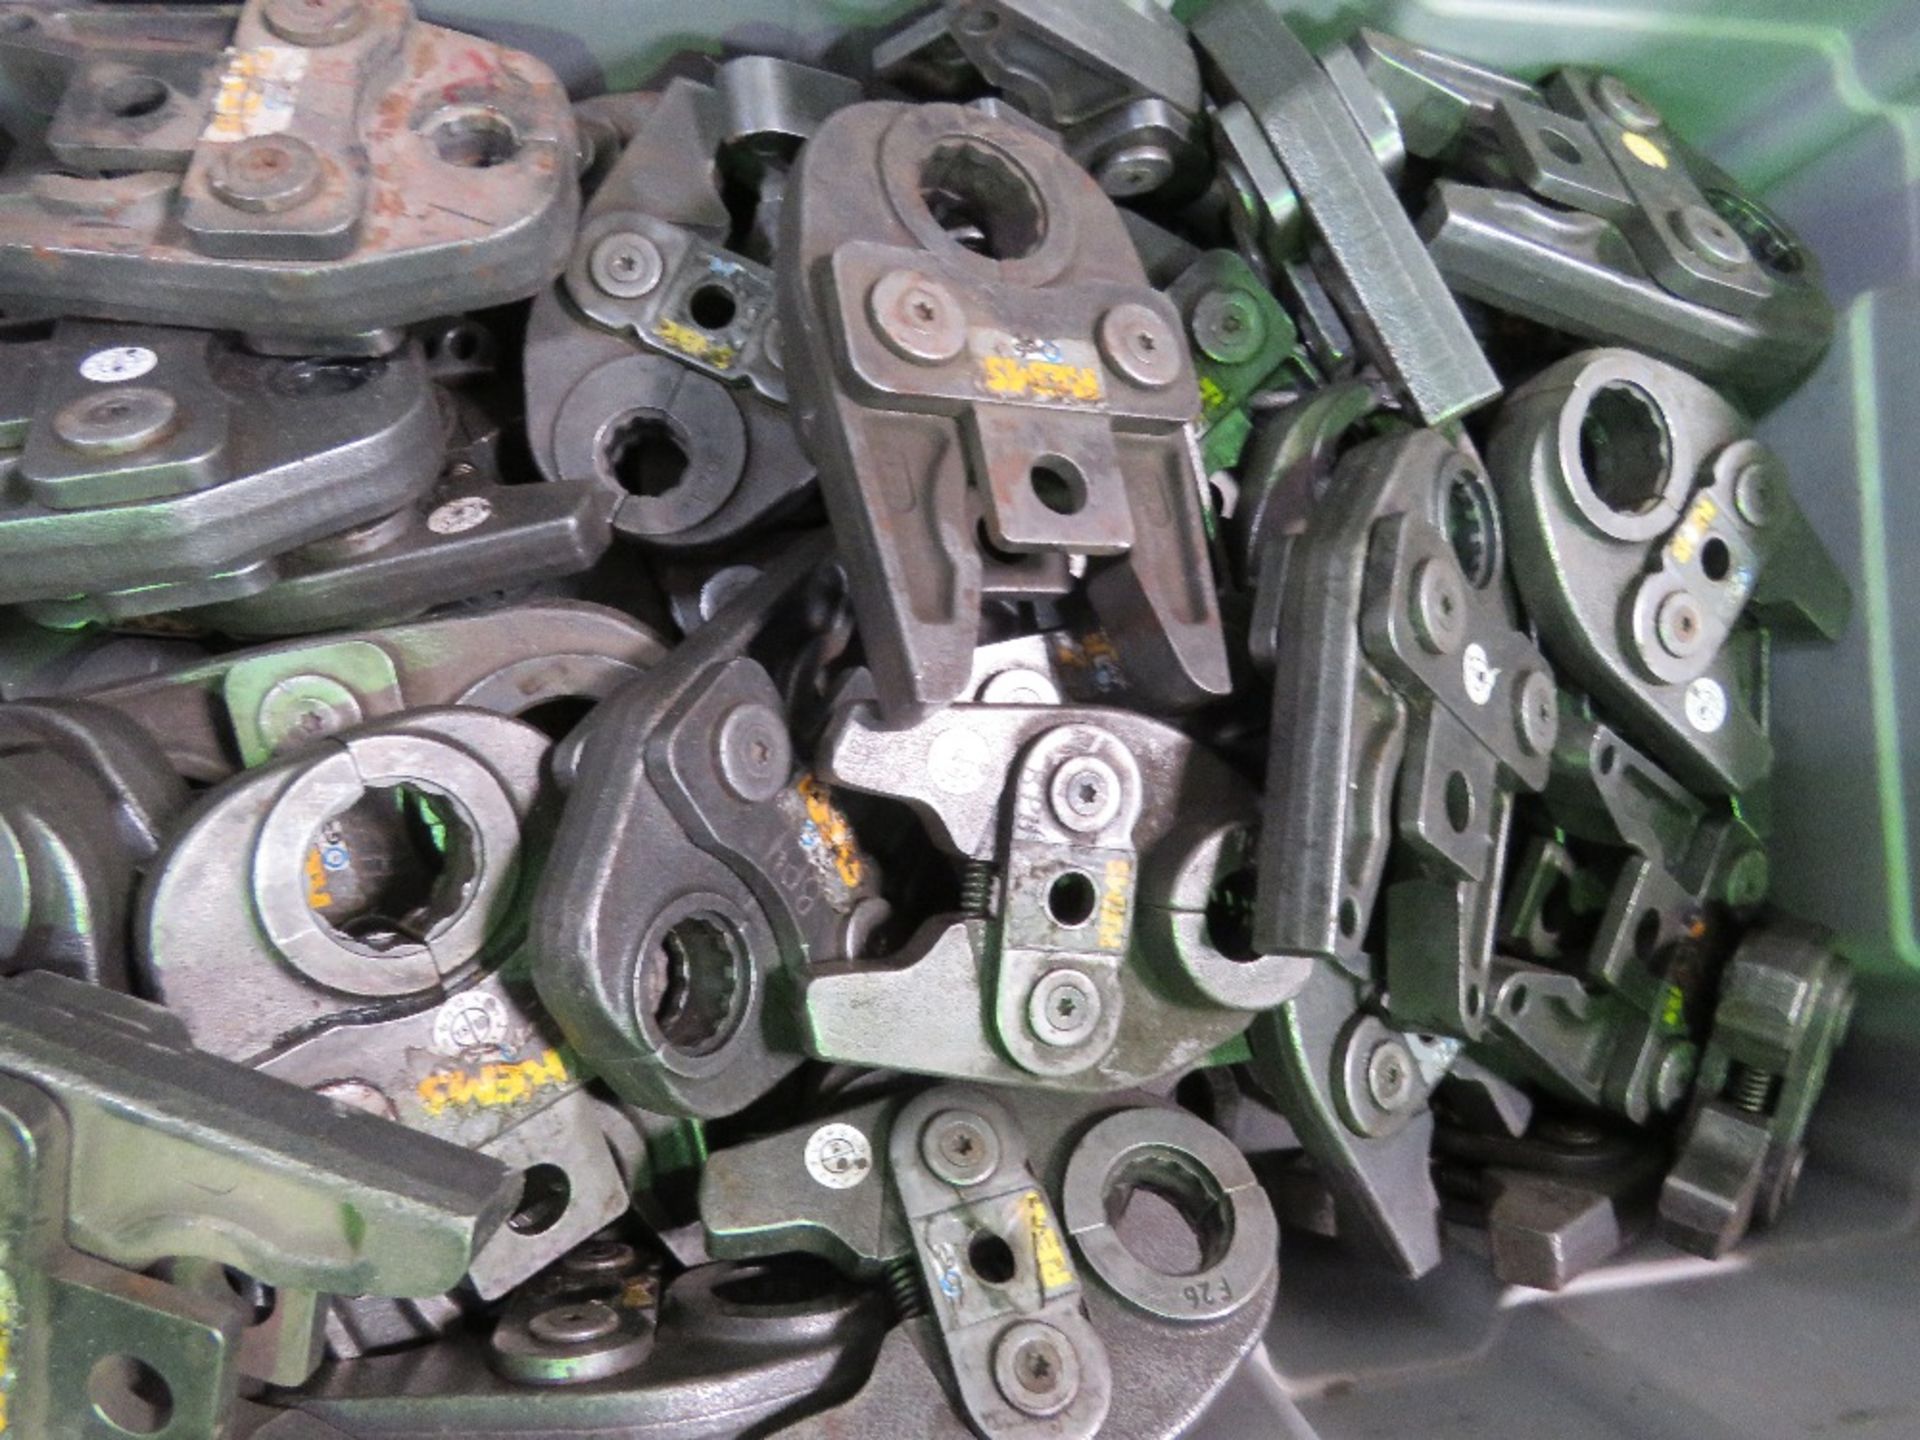 LARGE QUANTITY OF REMS PRESSING JAW HEADS, ASSORTED.